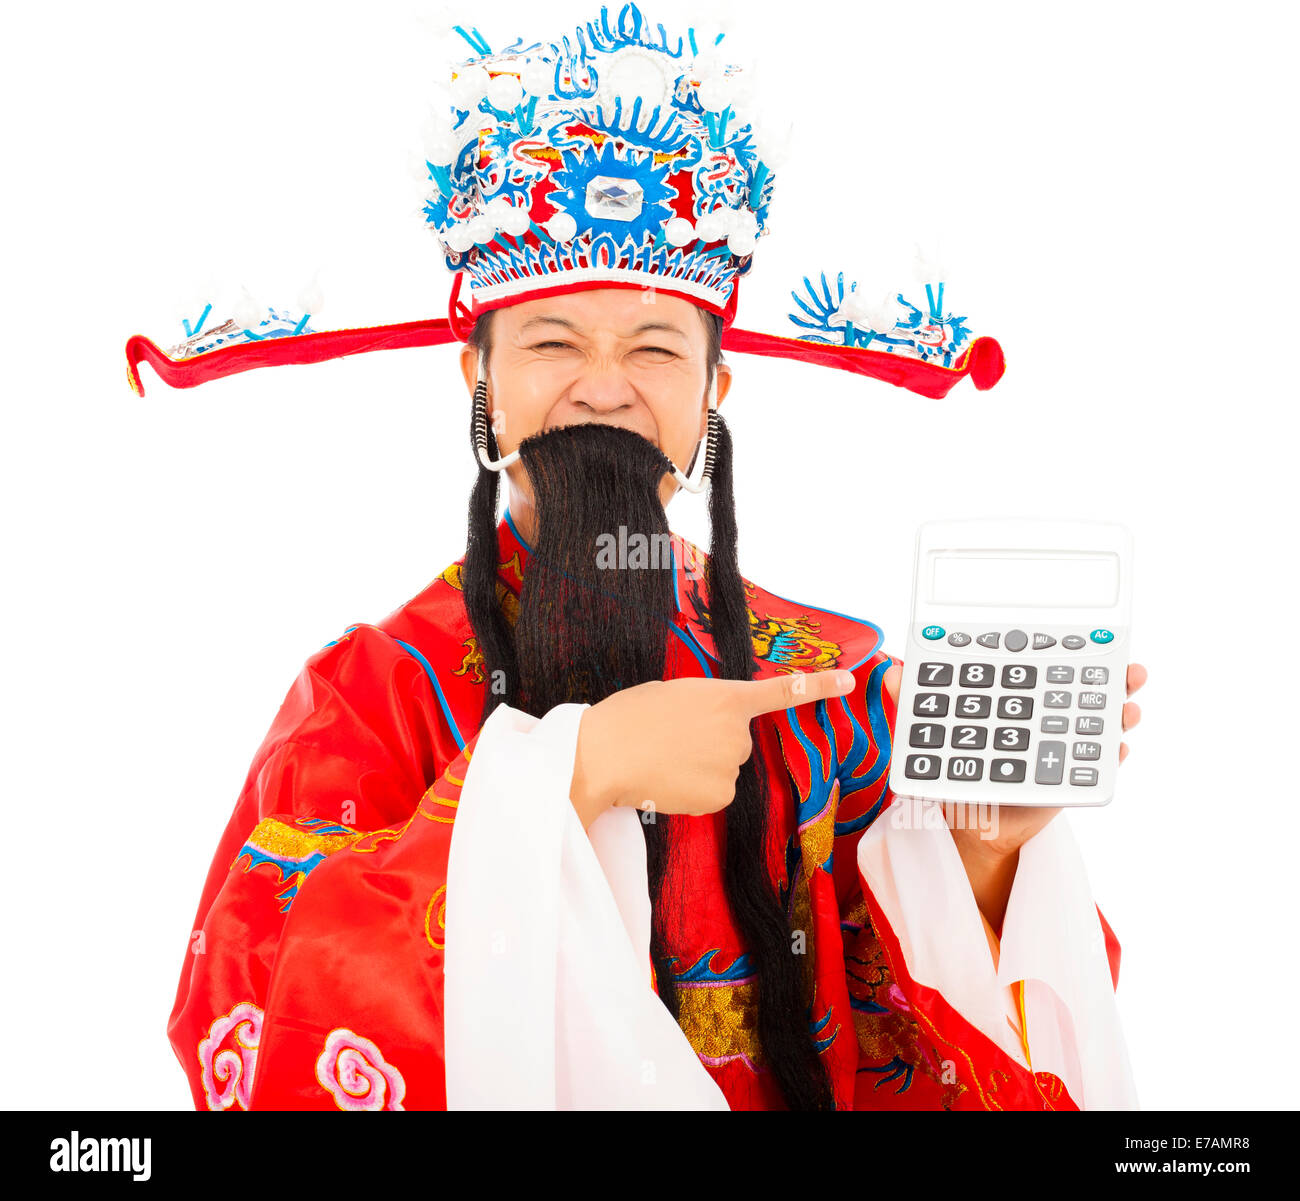 God of wealth pointing a compute machine over white background Stock Photo